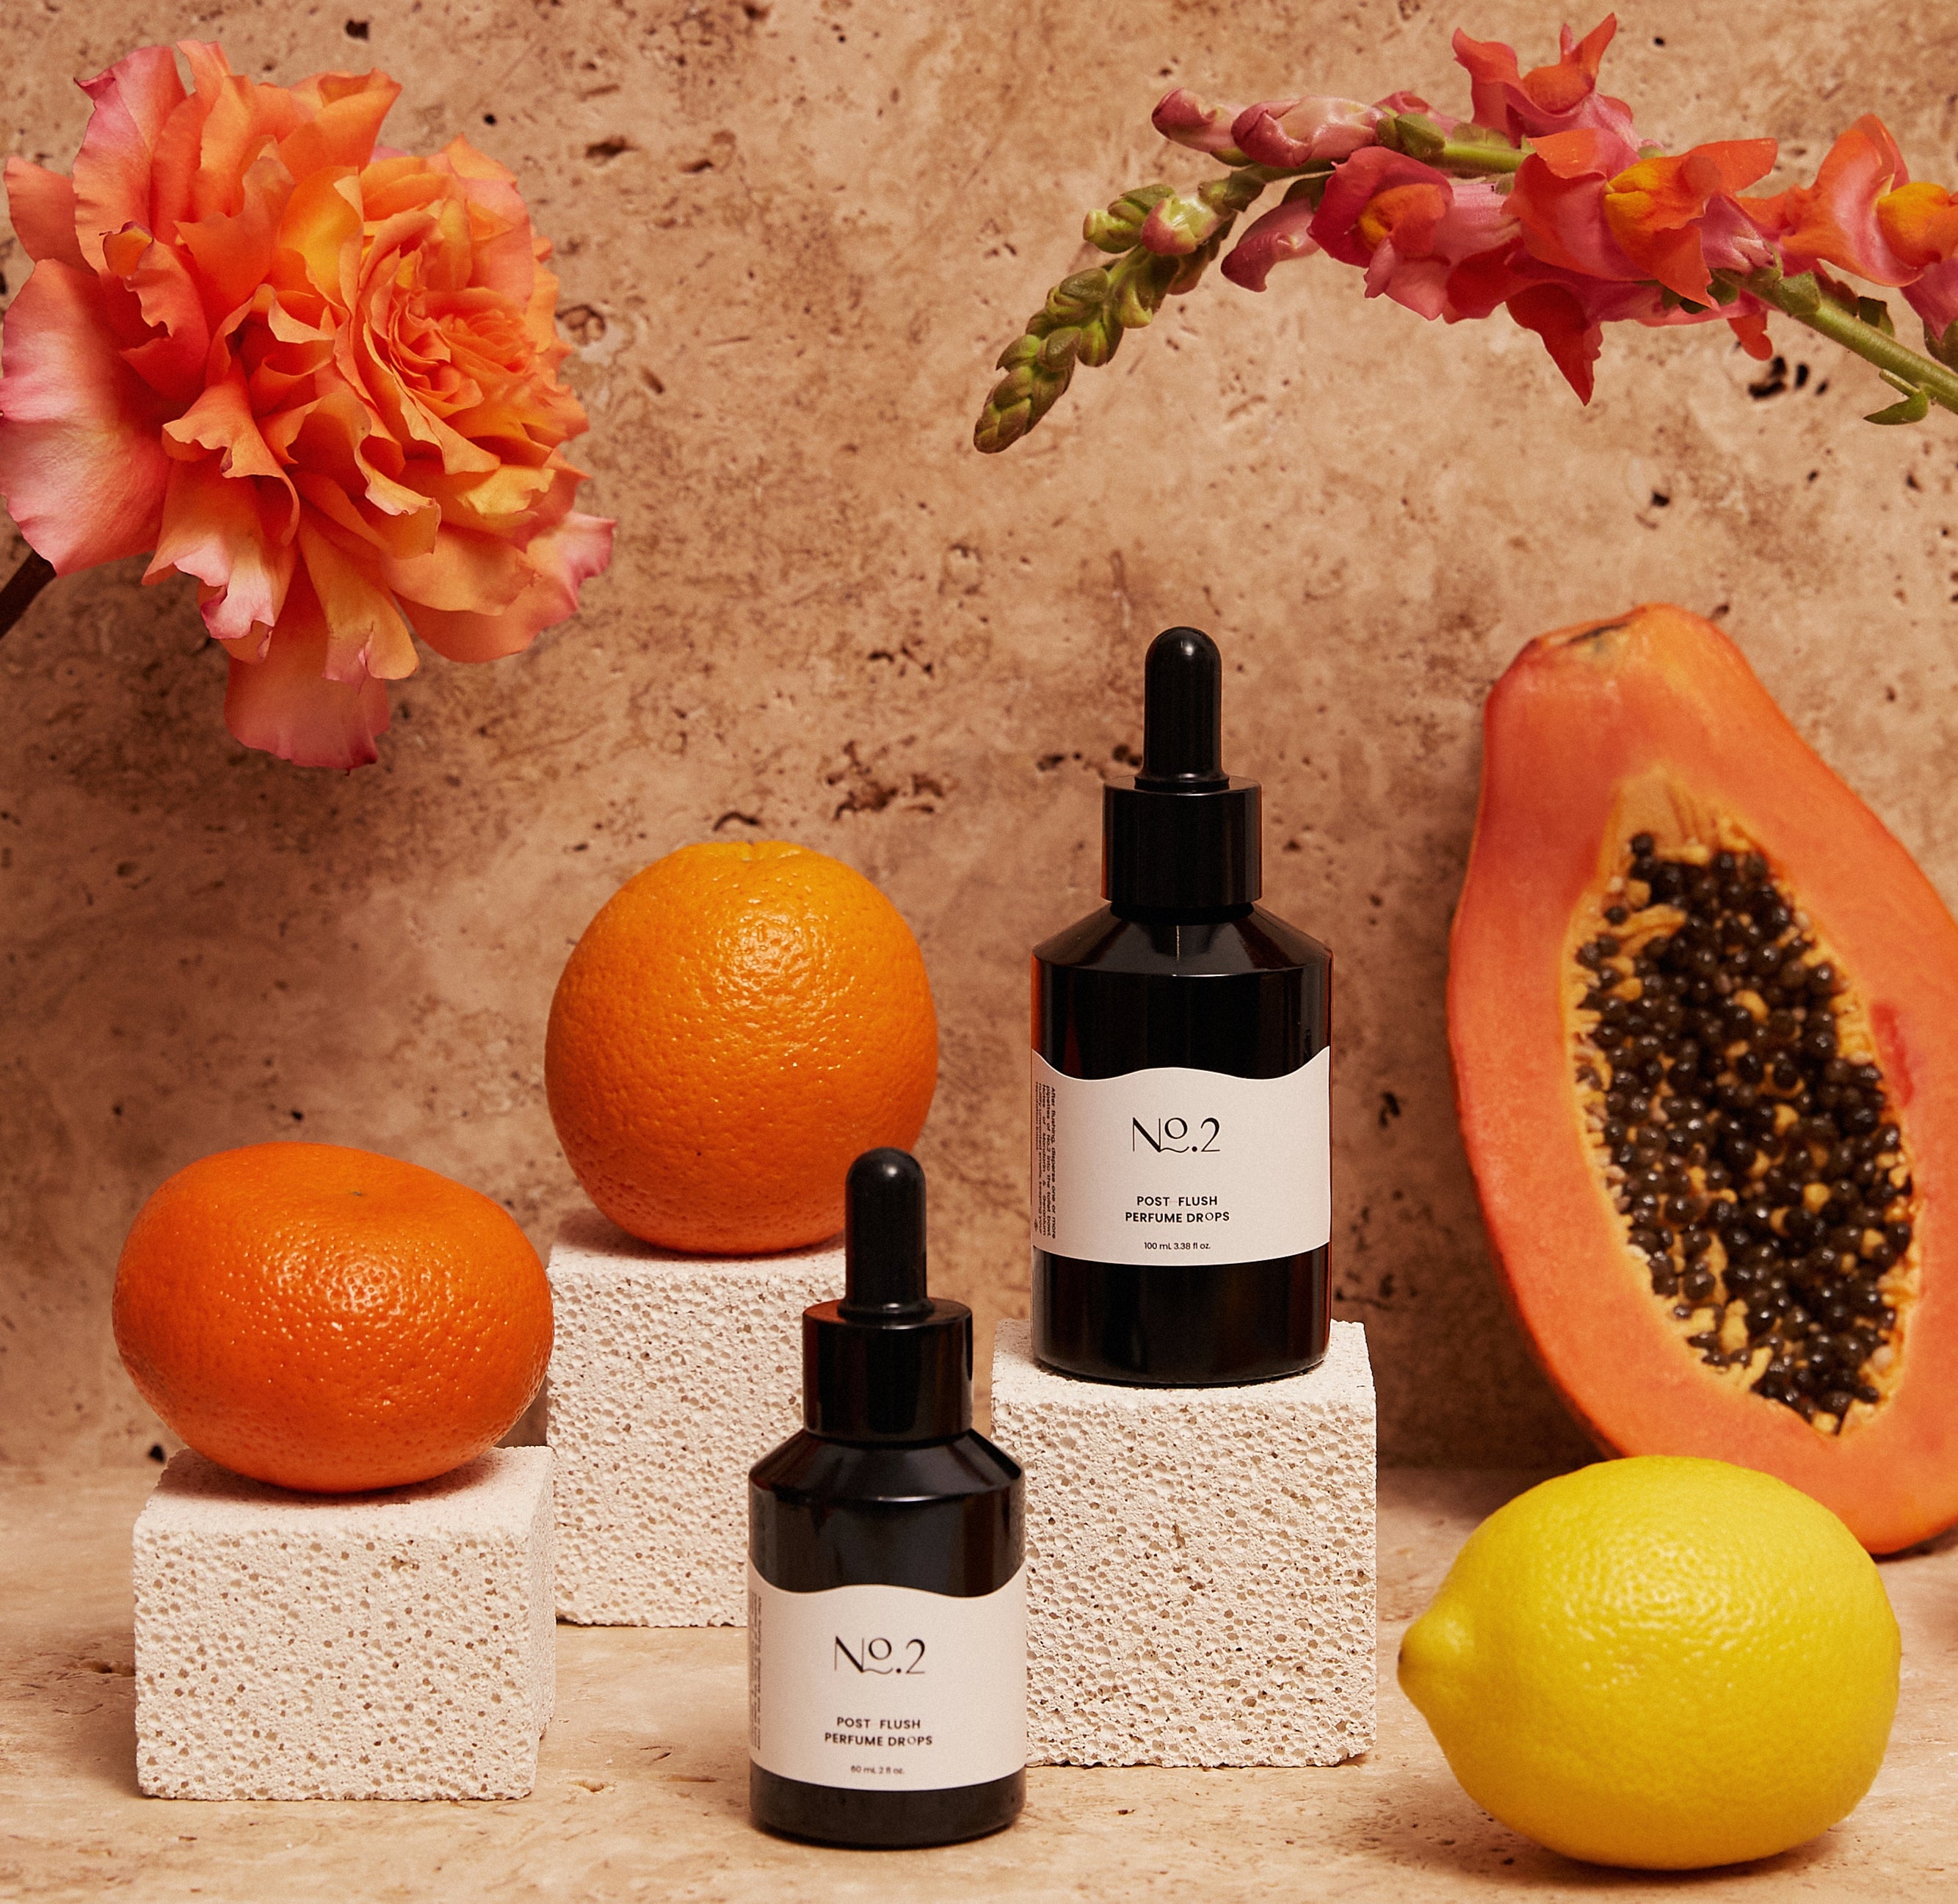 Two bottles of No.2 Co post poo toilet drops, surrounded by a mandarin, lemon and an orange. Two orange flowers and a sand coloured tile in the background